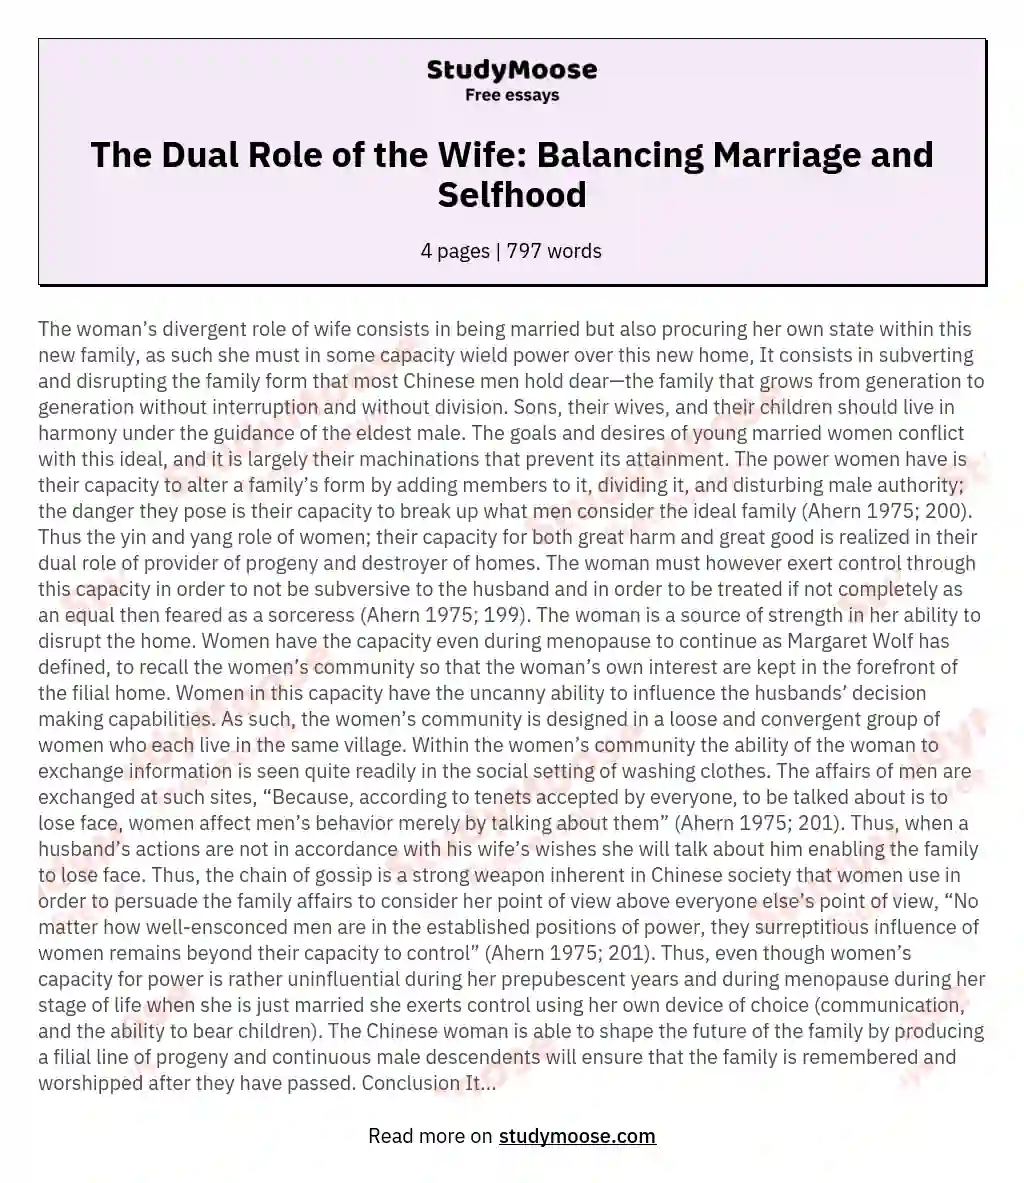 The Dual Role of the Wife: Balancing Marriage and Selfhood essay